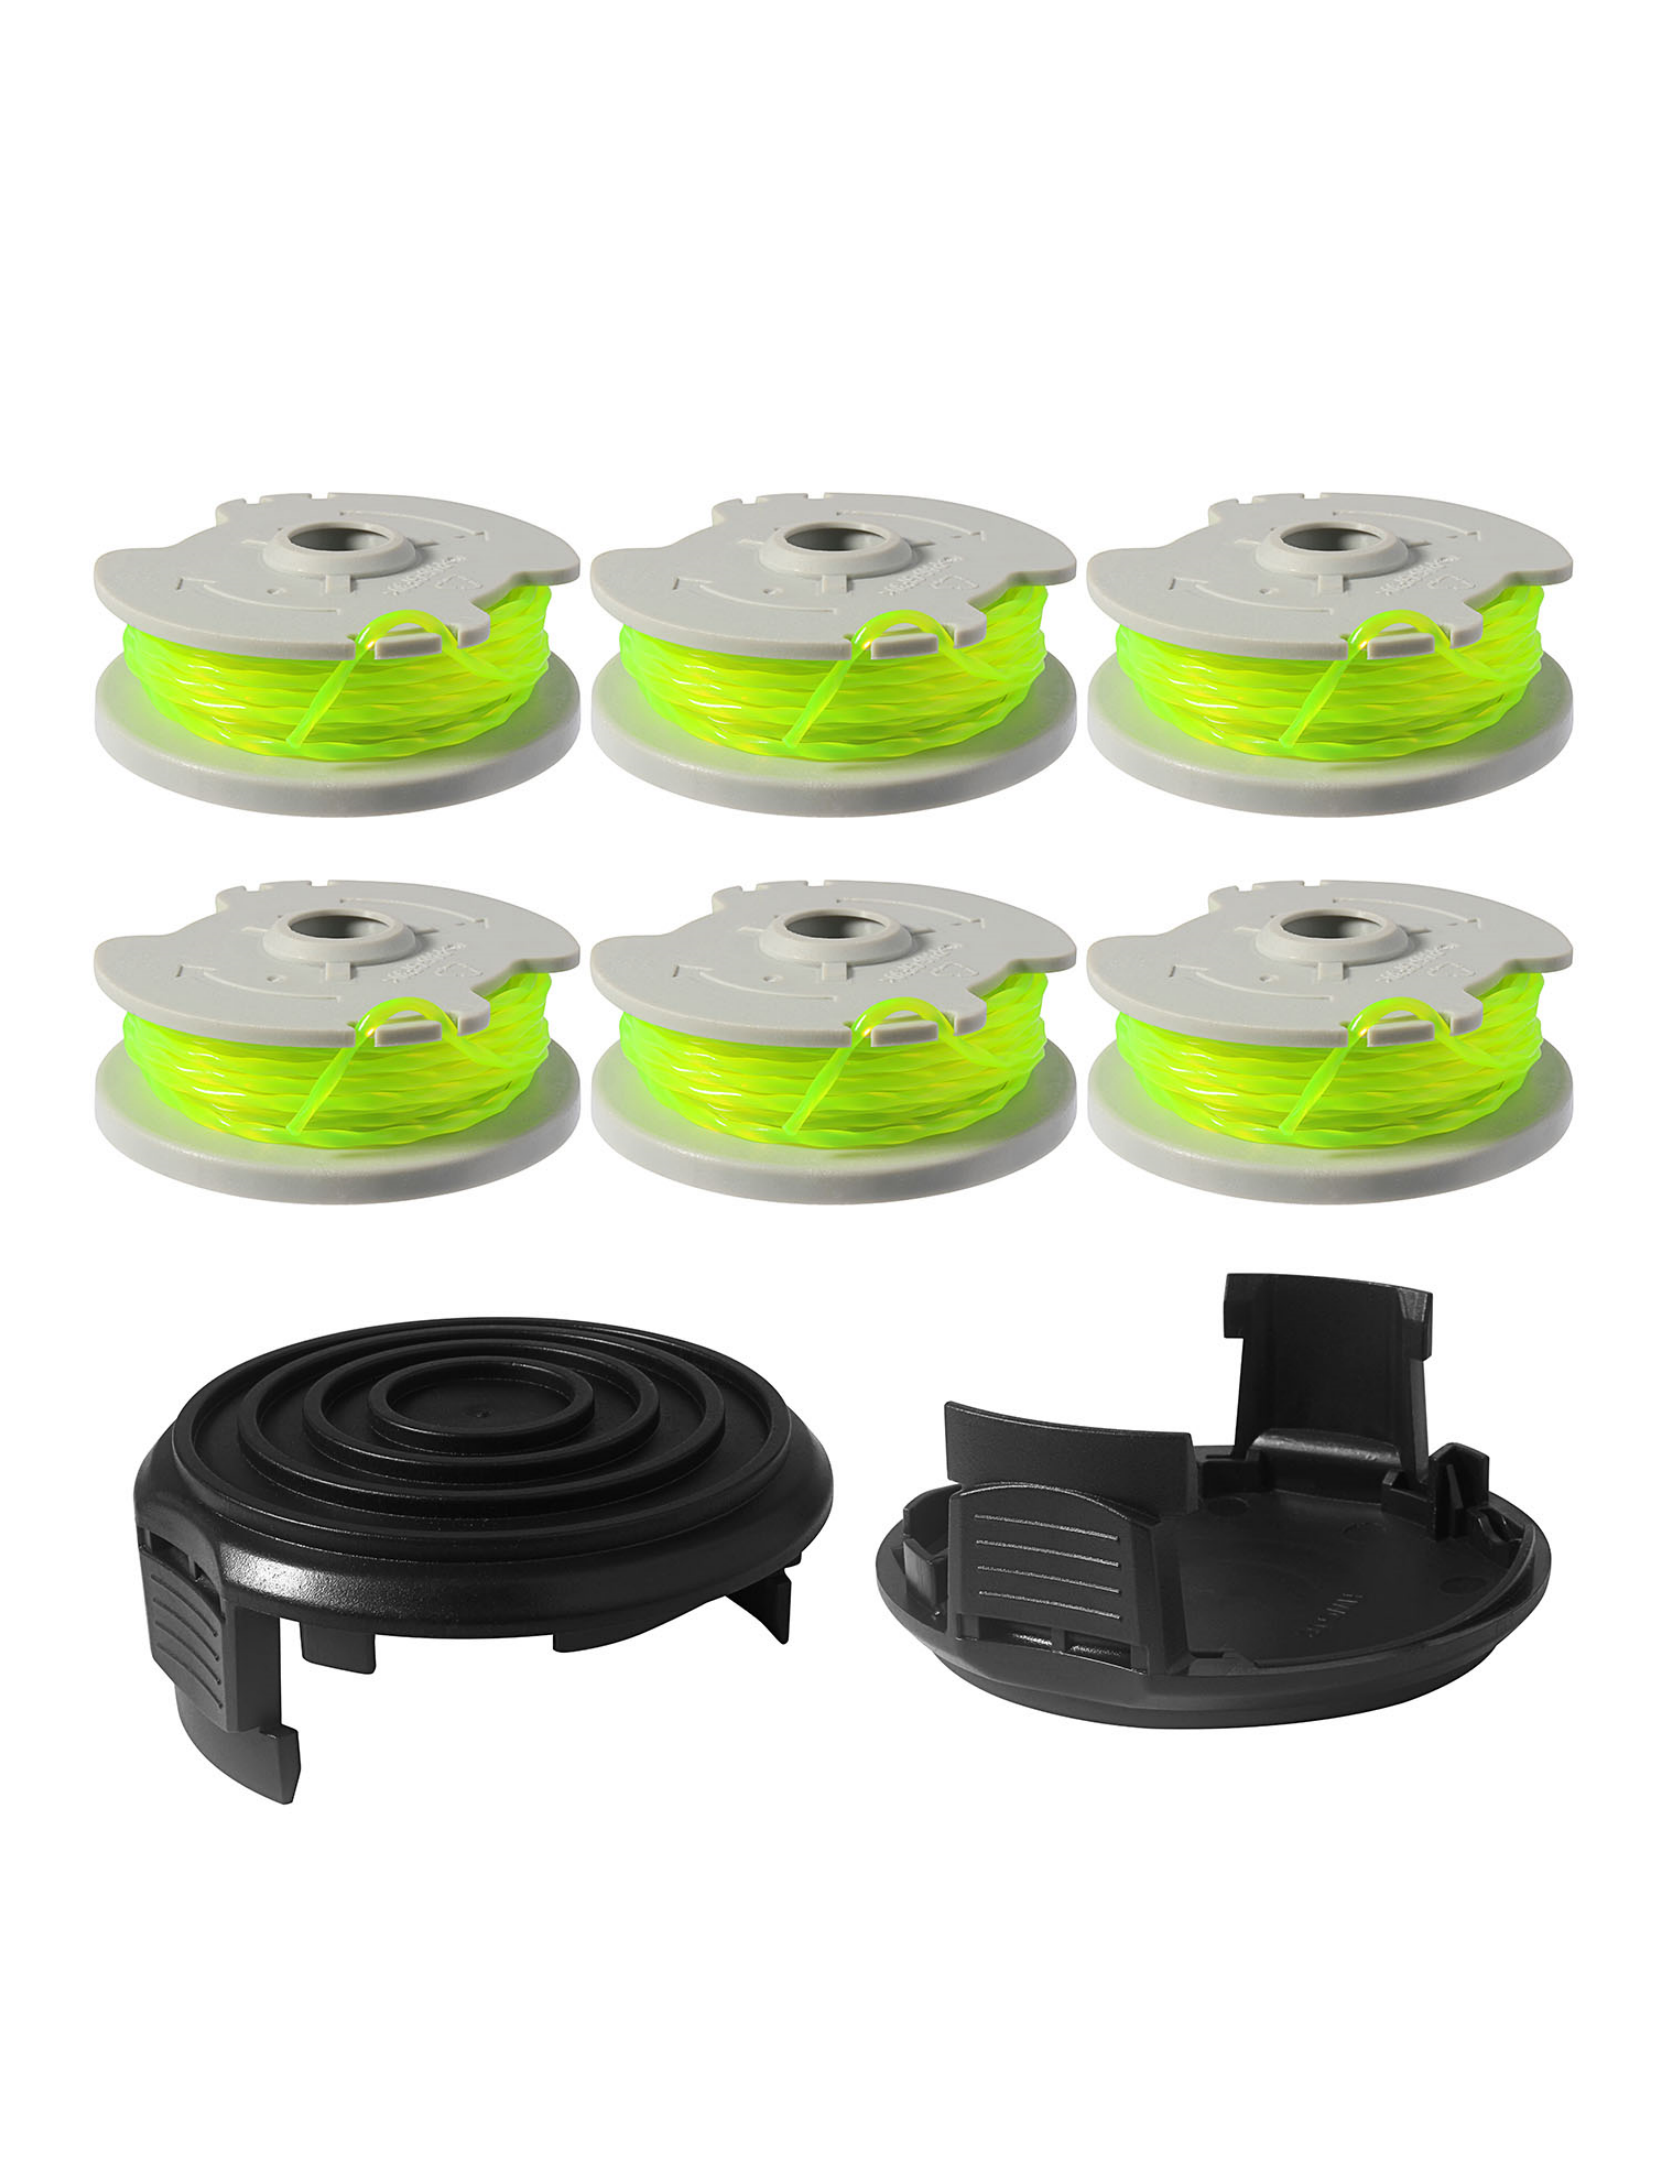 THTEN WA0014 Trimmer Replacement Spools for Worx WG168 WG184 WG190 WG191 Weed Eater String Edger Spool Line Refills Parts Auto-Feed 20ft 0.080" with WA0037 Cap Covers (6 spools,2 Cap)